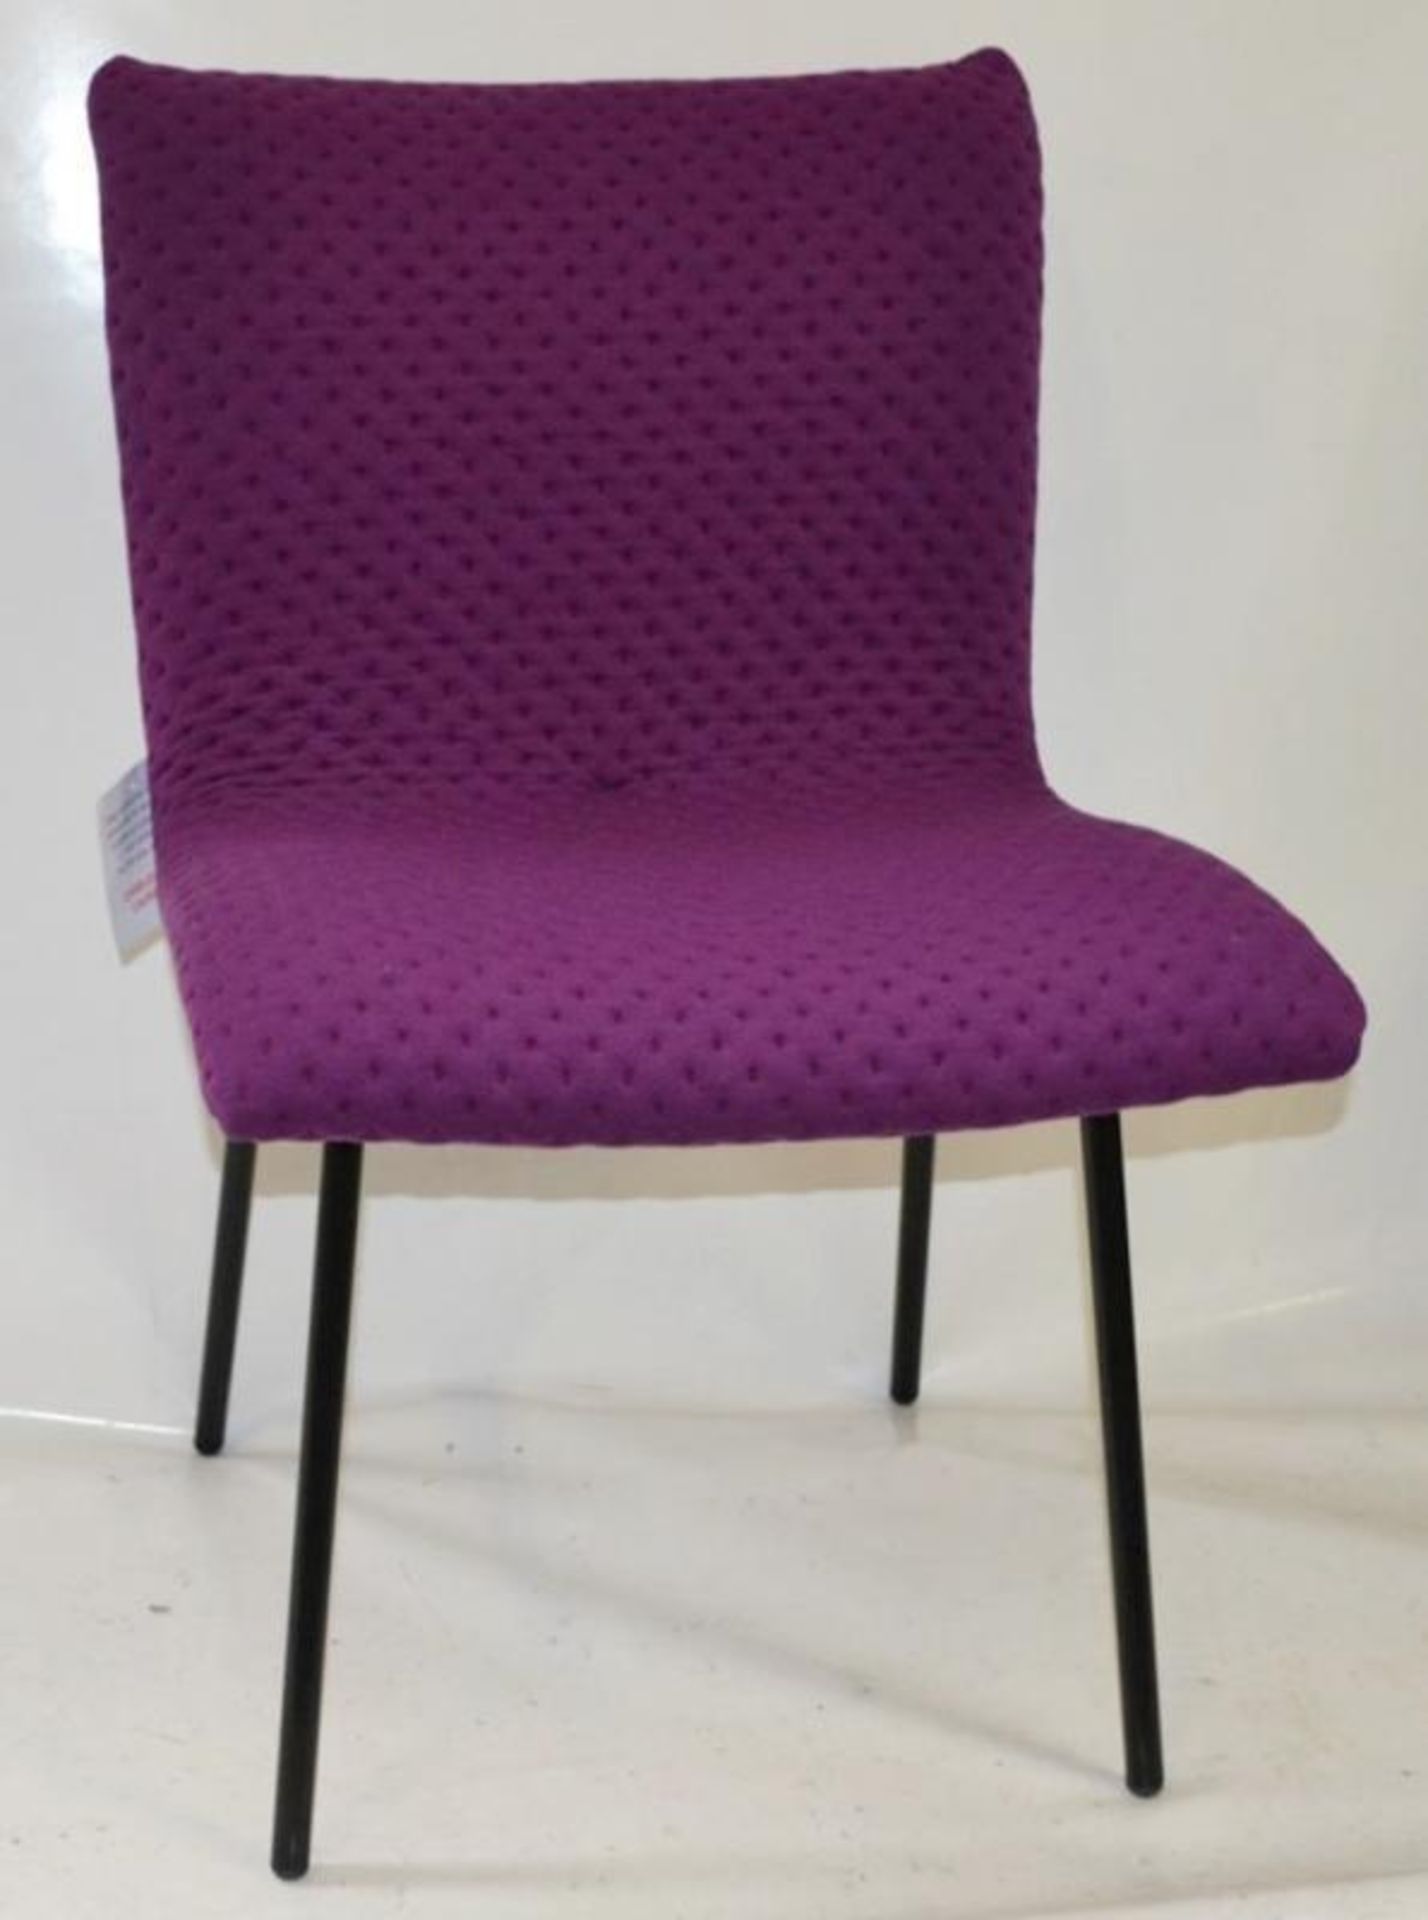 1 x Ligne Roset 'Calin' Chair - Features Bright Purple Upholsterey - Made In France - Ref: 6206608 P - Image 3 of 7